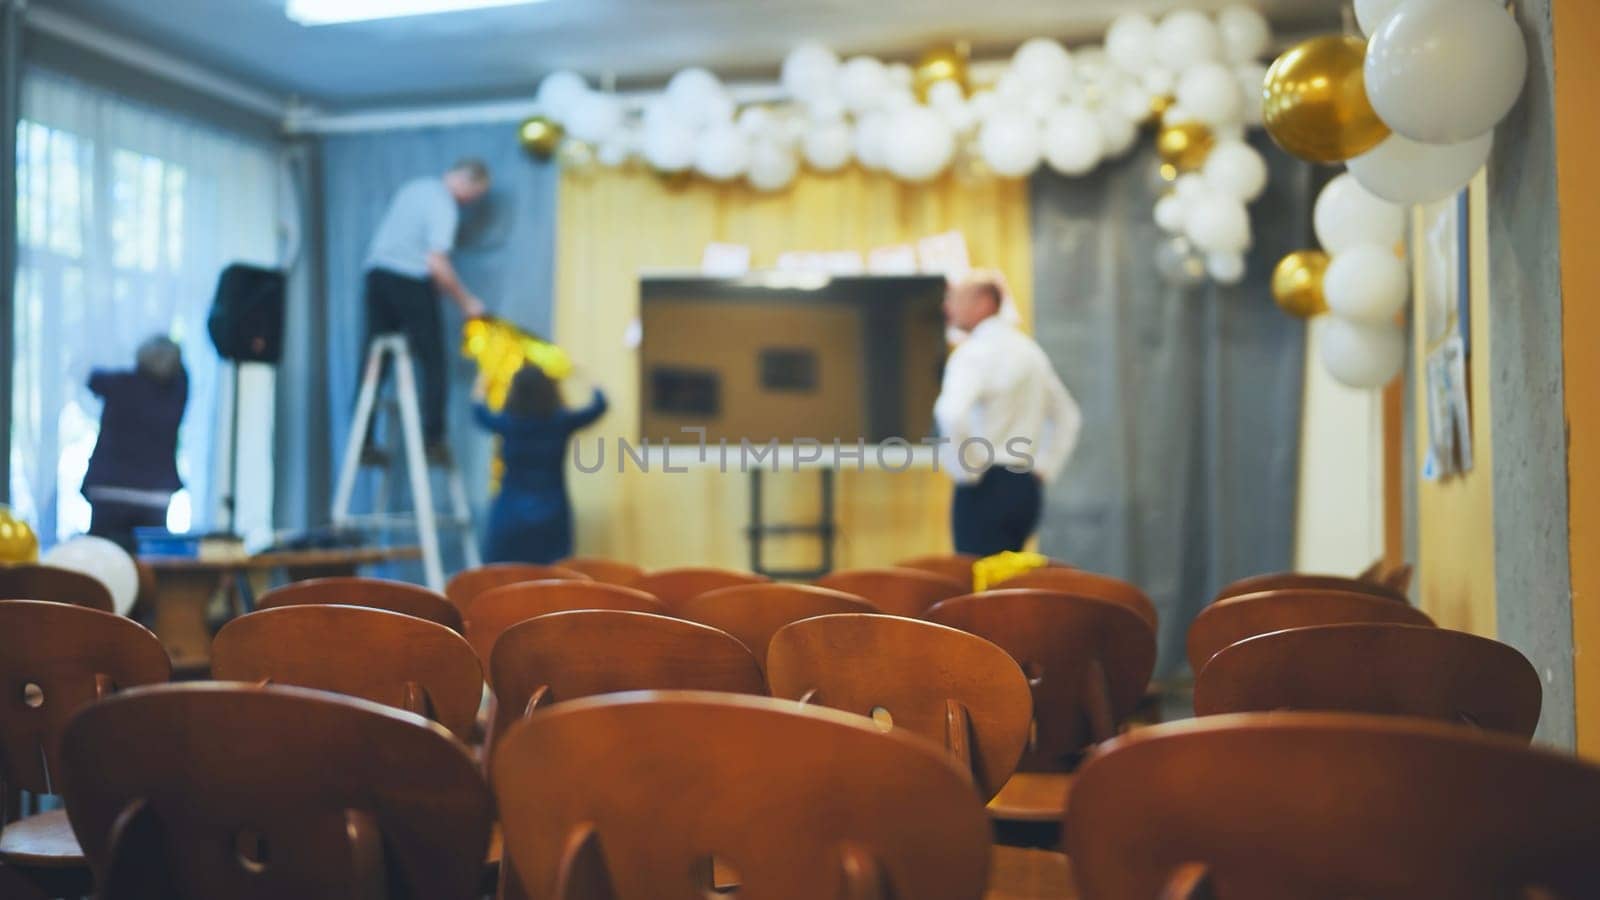 Teachers prepare the hall for a school event. Focus focus on the chairs. by DovidPro